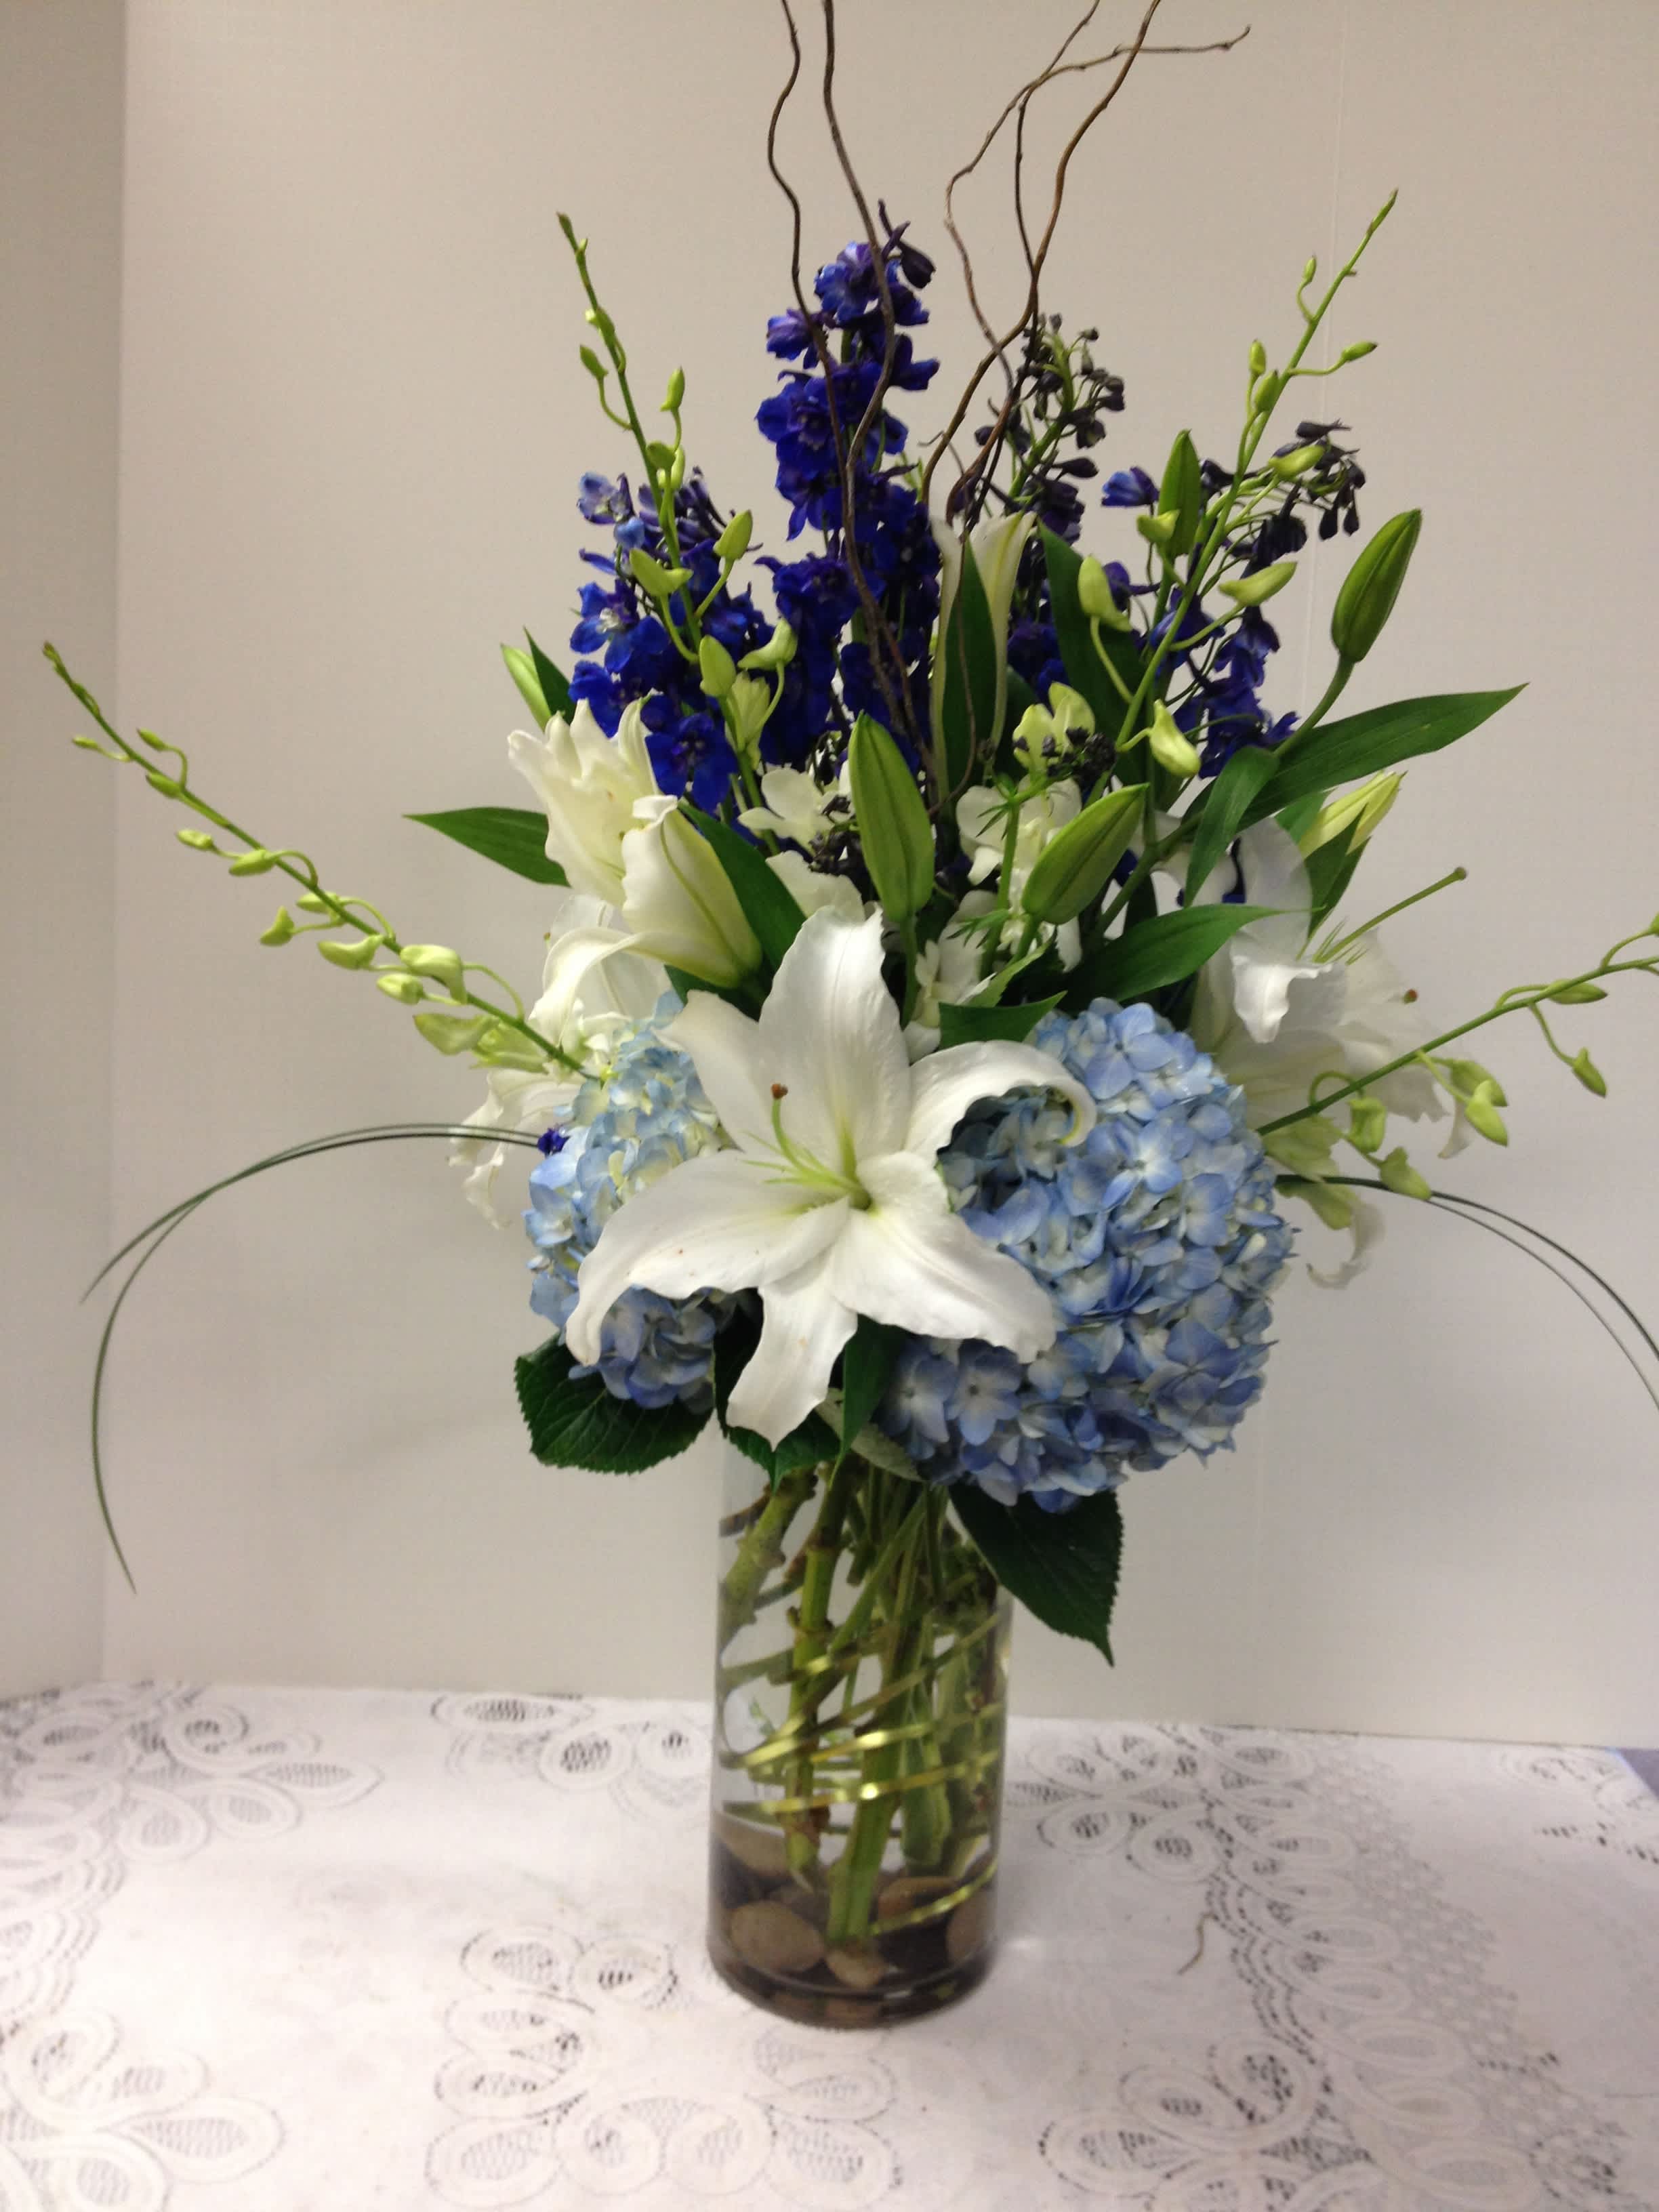 Classy - A clear glass container filled with southern blue hydrangea, fragrant white lilies, dendrobium orchids and showy curly willow accented with lily grass.